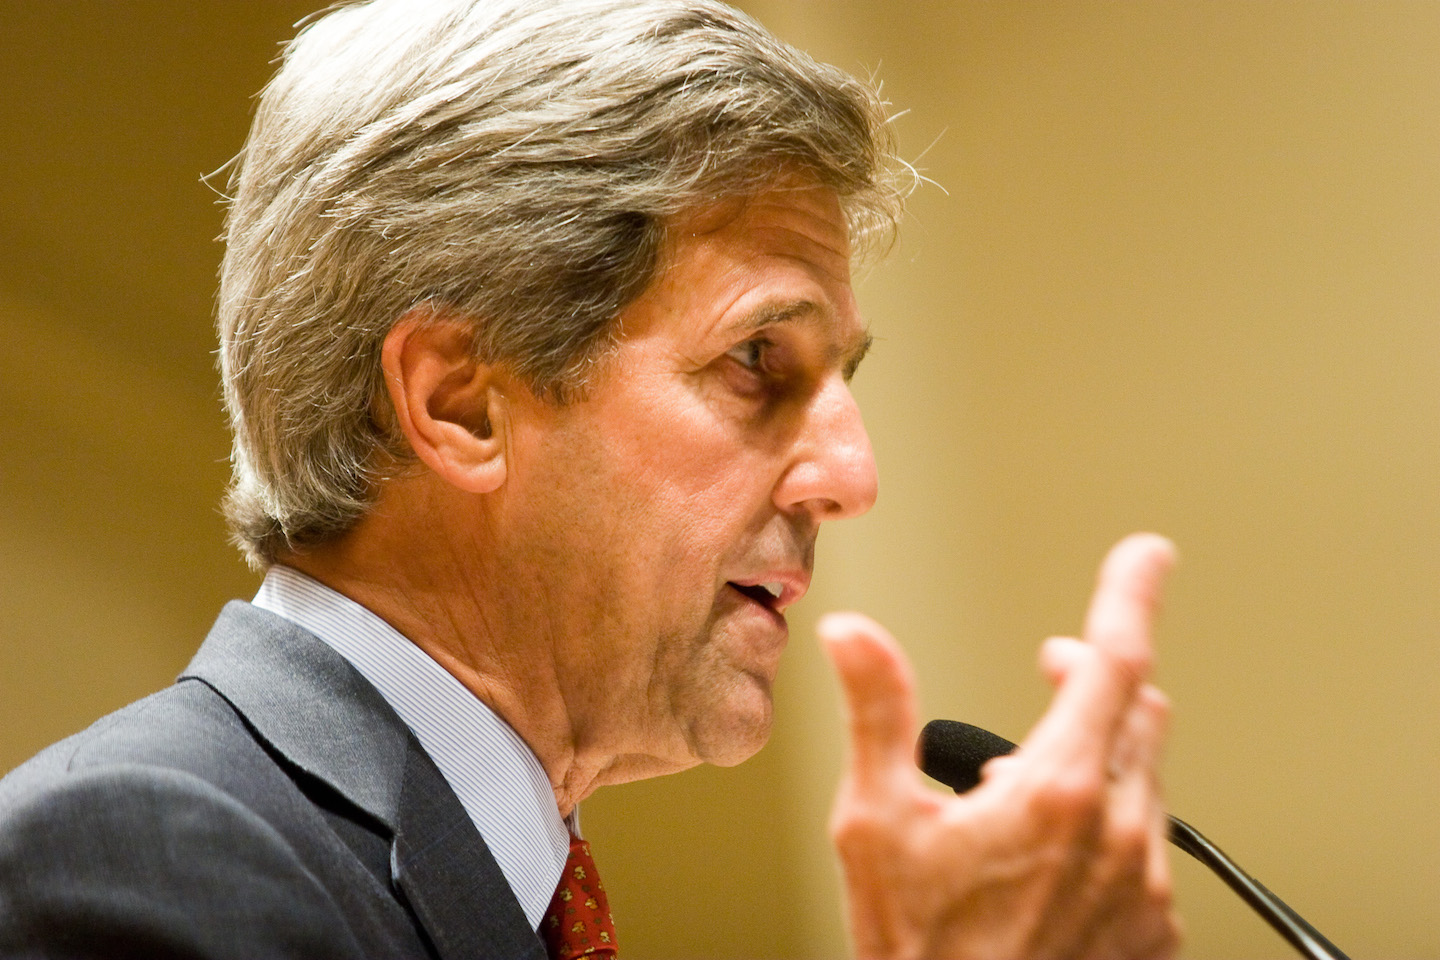 SNOPES caught misleading readers about key facts related to charity funding for John Kerry’s daughter